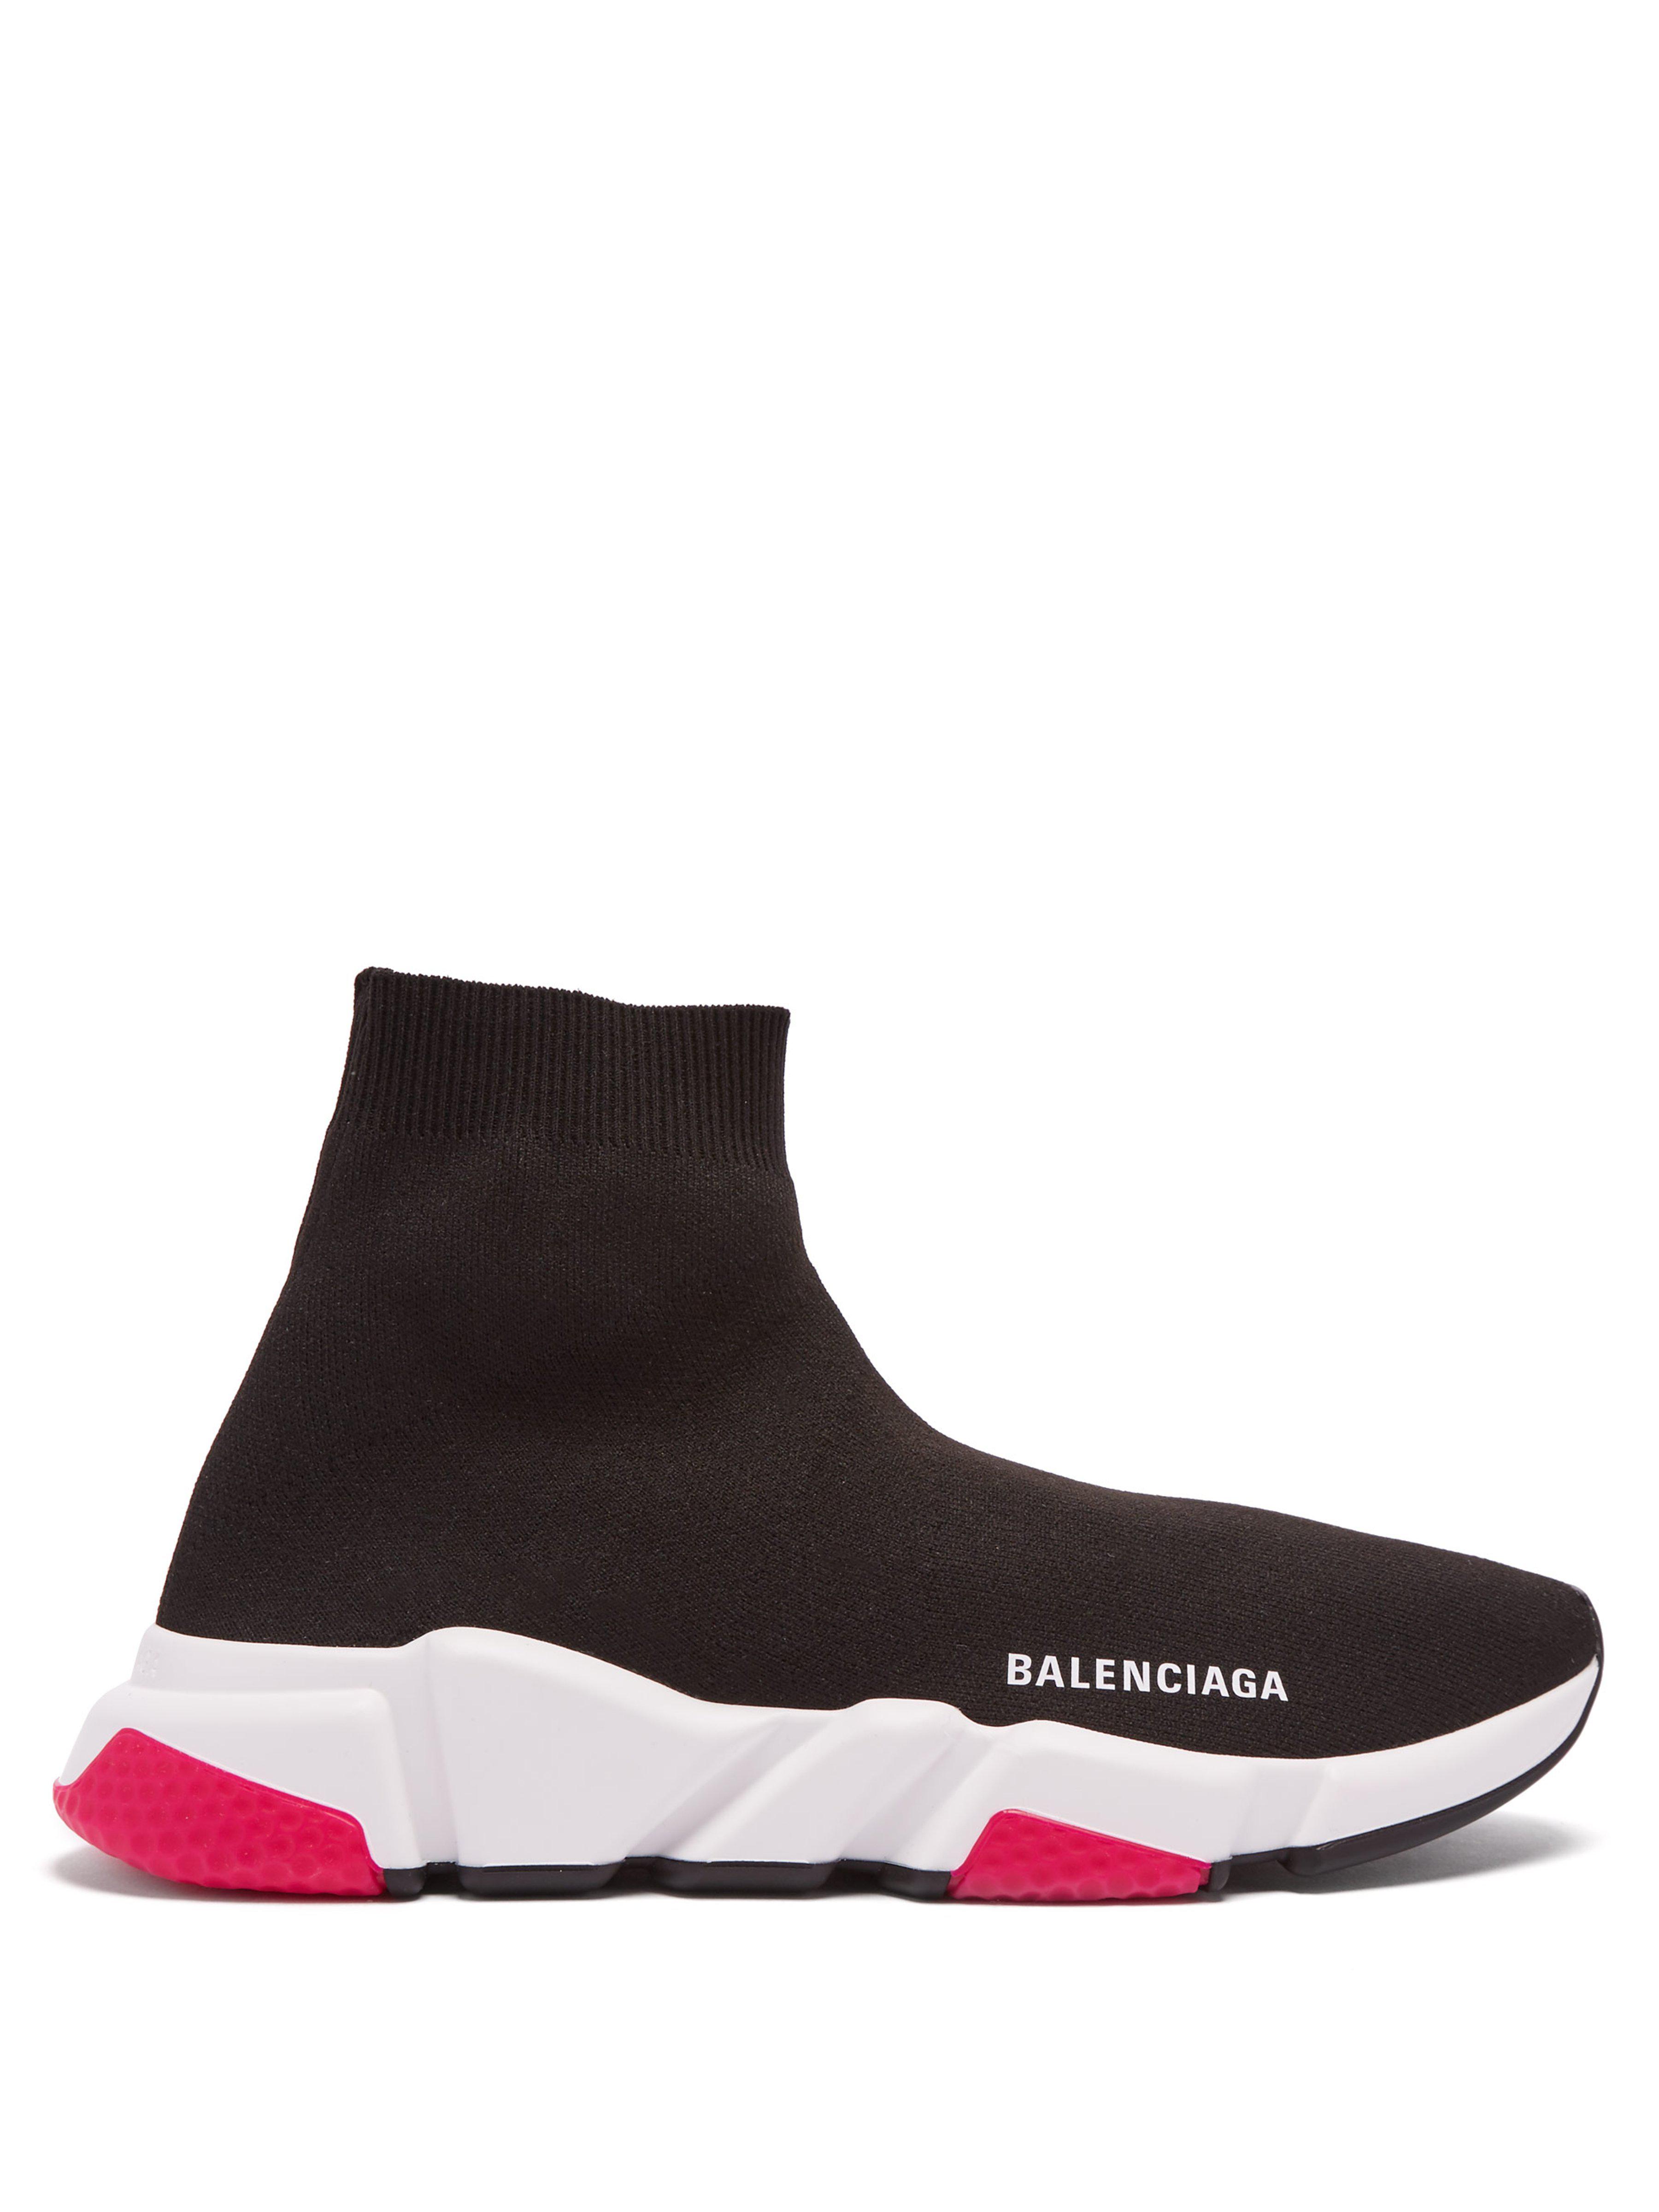 balenciaga baskets chaussettes, great trade UP TO 72% OFF -  www.aimilpharmaceuticals.com